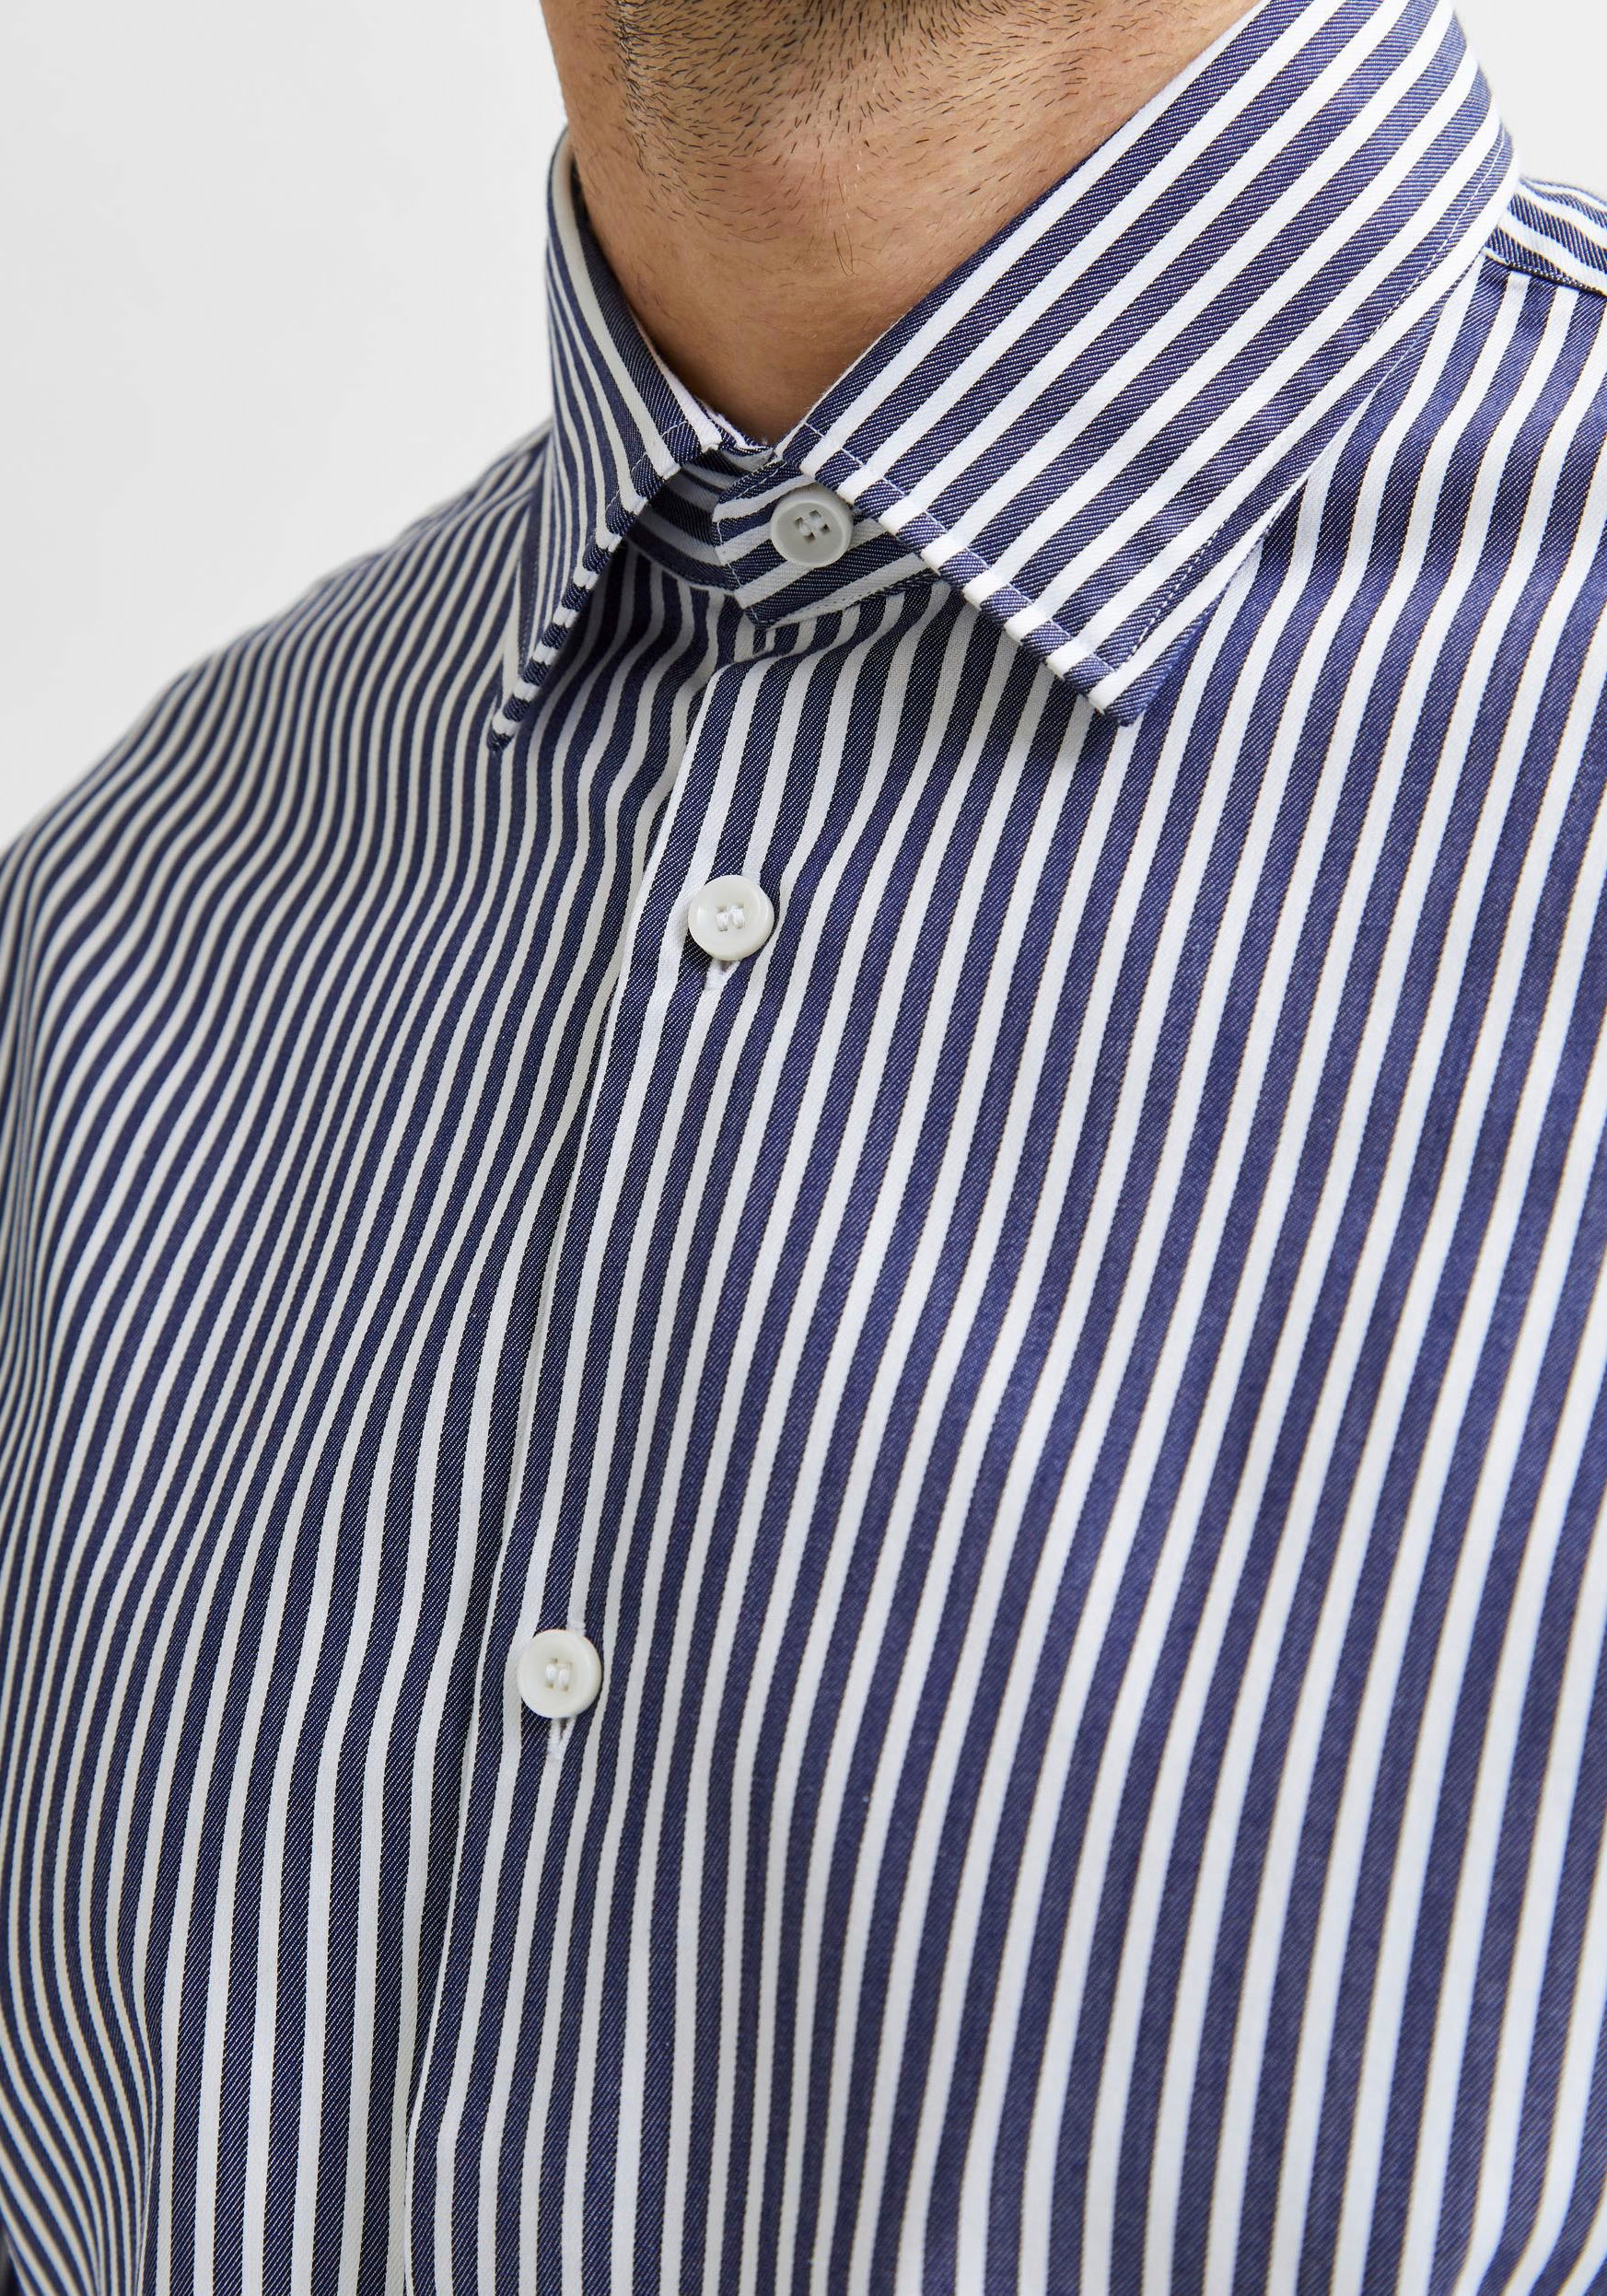 bei online SELECTED SHIRT« HOMME Businesshemd OTTO kaufen »SLHSLIMETHAN